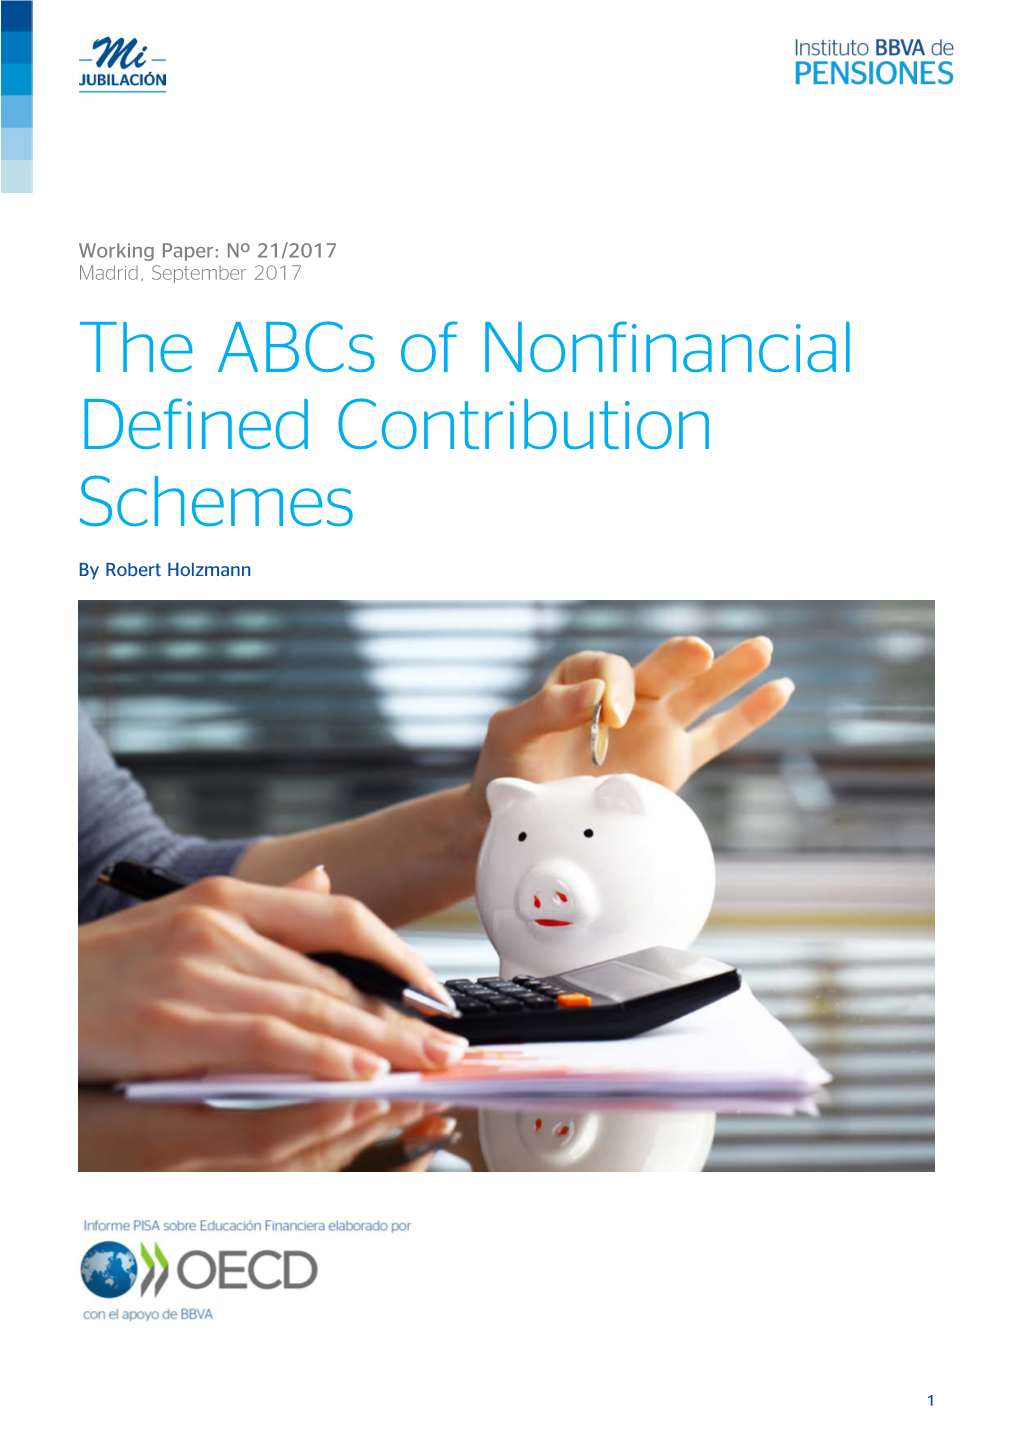 The Abcs of Nonfinancial Defined Contribution Schemes